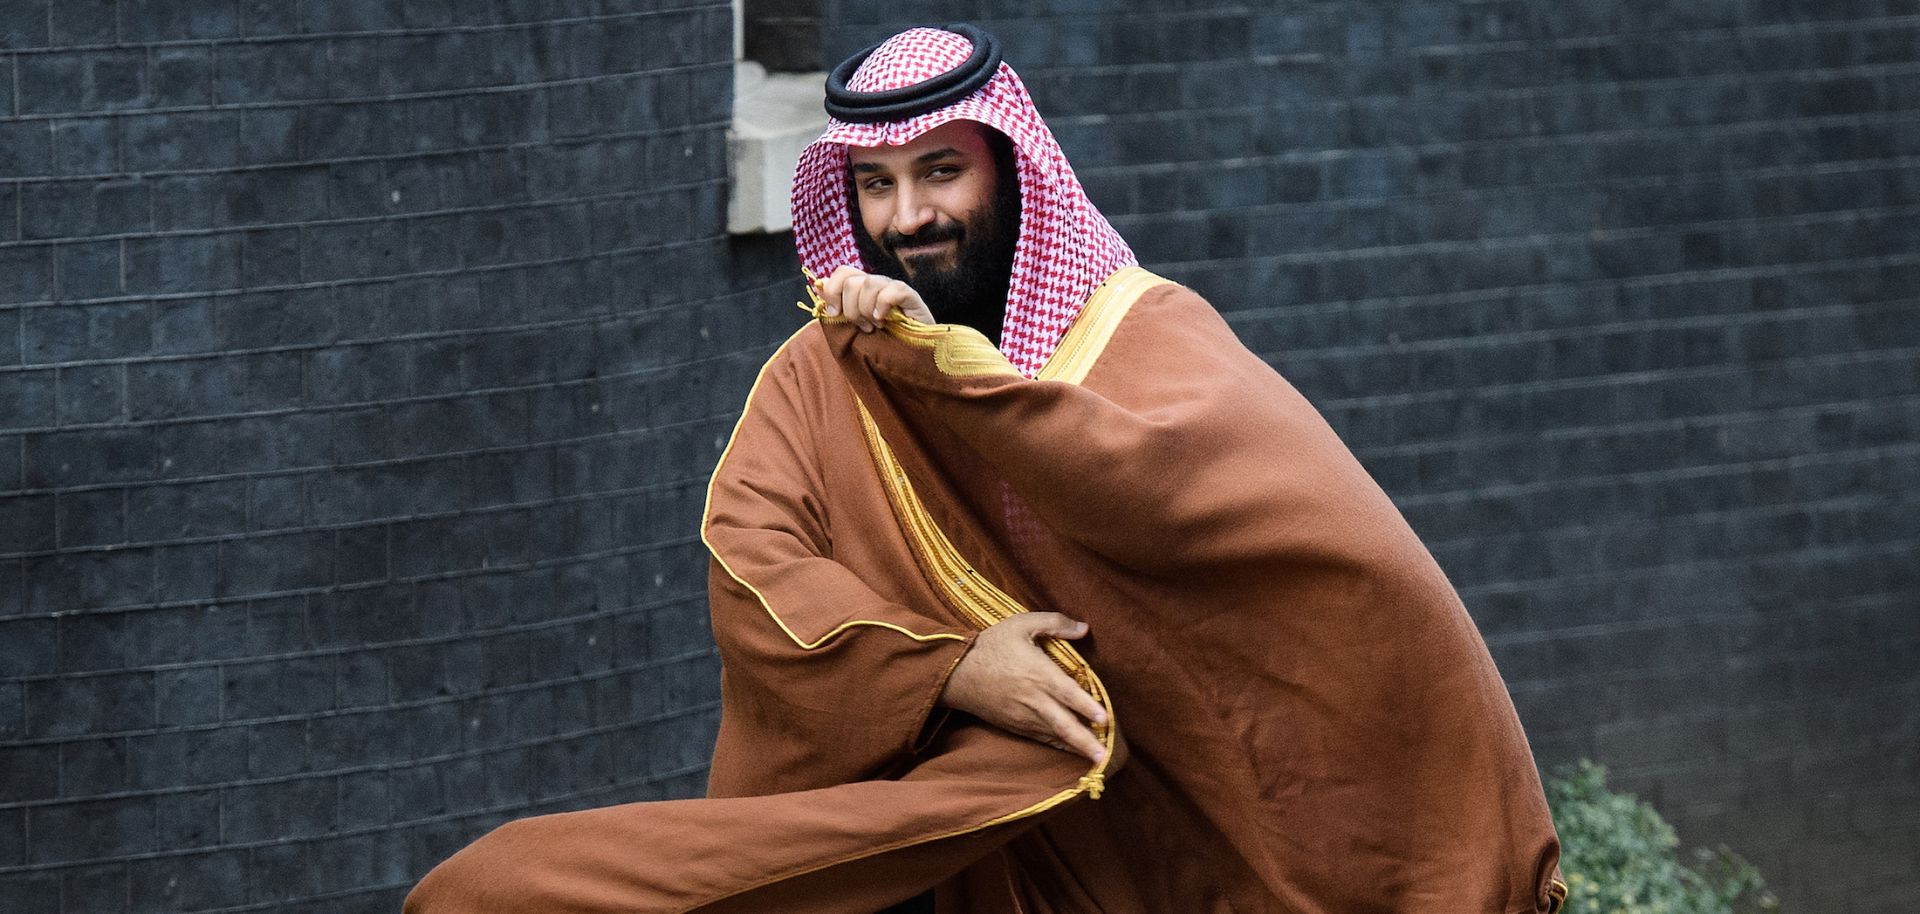 Saudi Crown Prince Mohammed bin Salman arrives for a meeting with British Prime Minister Theresa May in London on March 7, 2018.